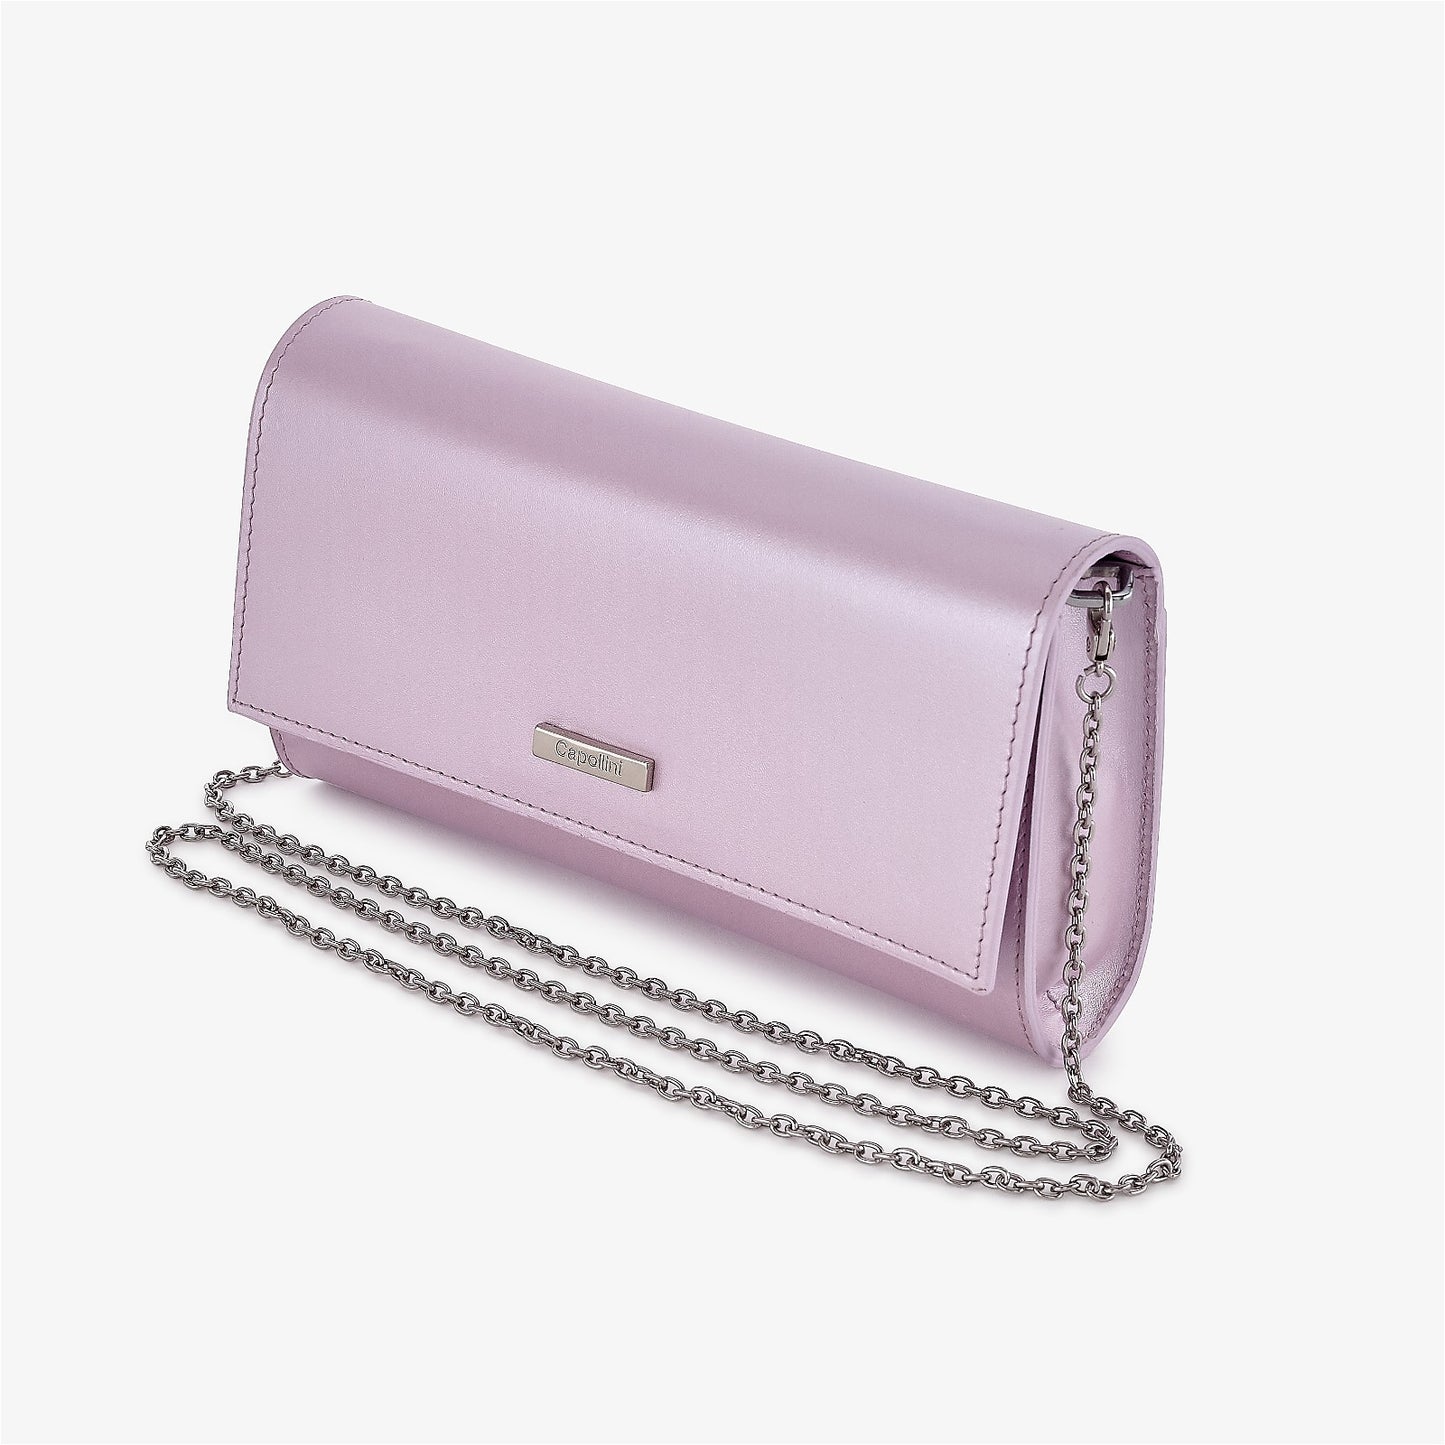 Orchid Candy Pearl Clutch